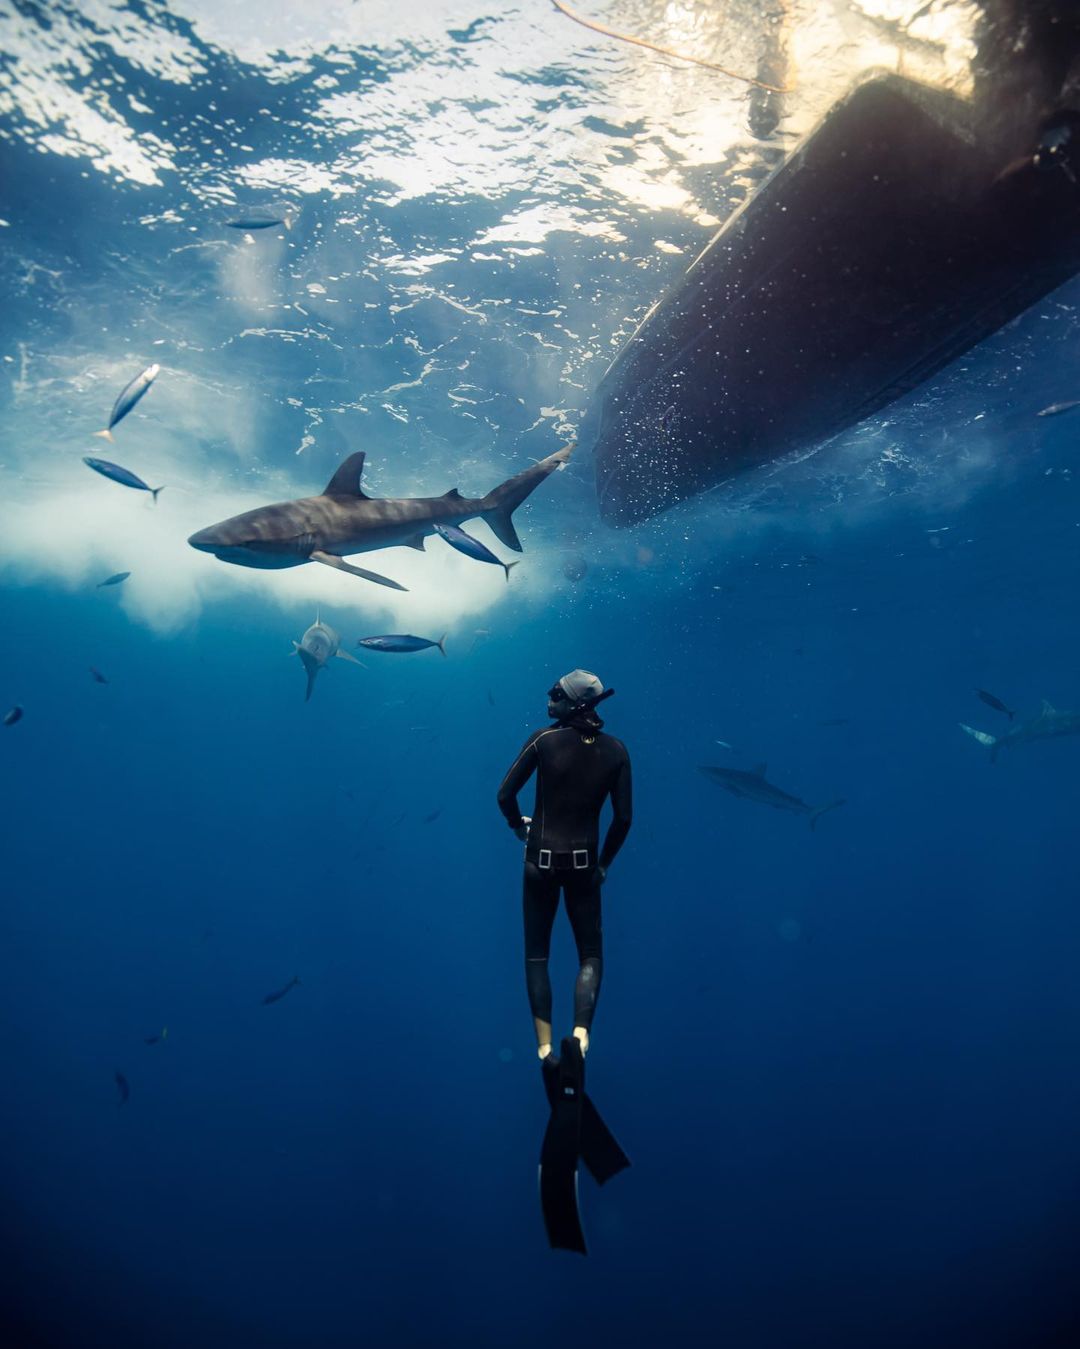 A photo of a free diver coming up from a dive. Fish and sharks can be seen swimming around the diver along with a large shark and a boat closer to the water's surface.